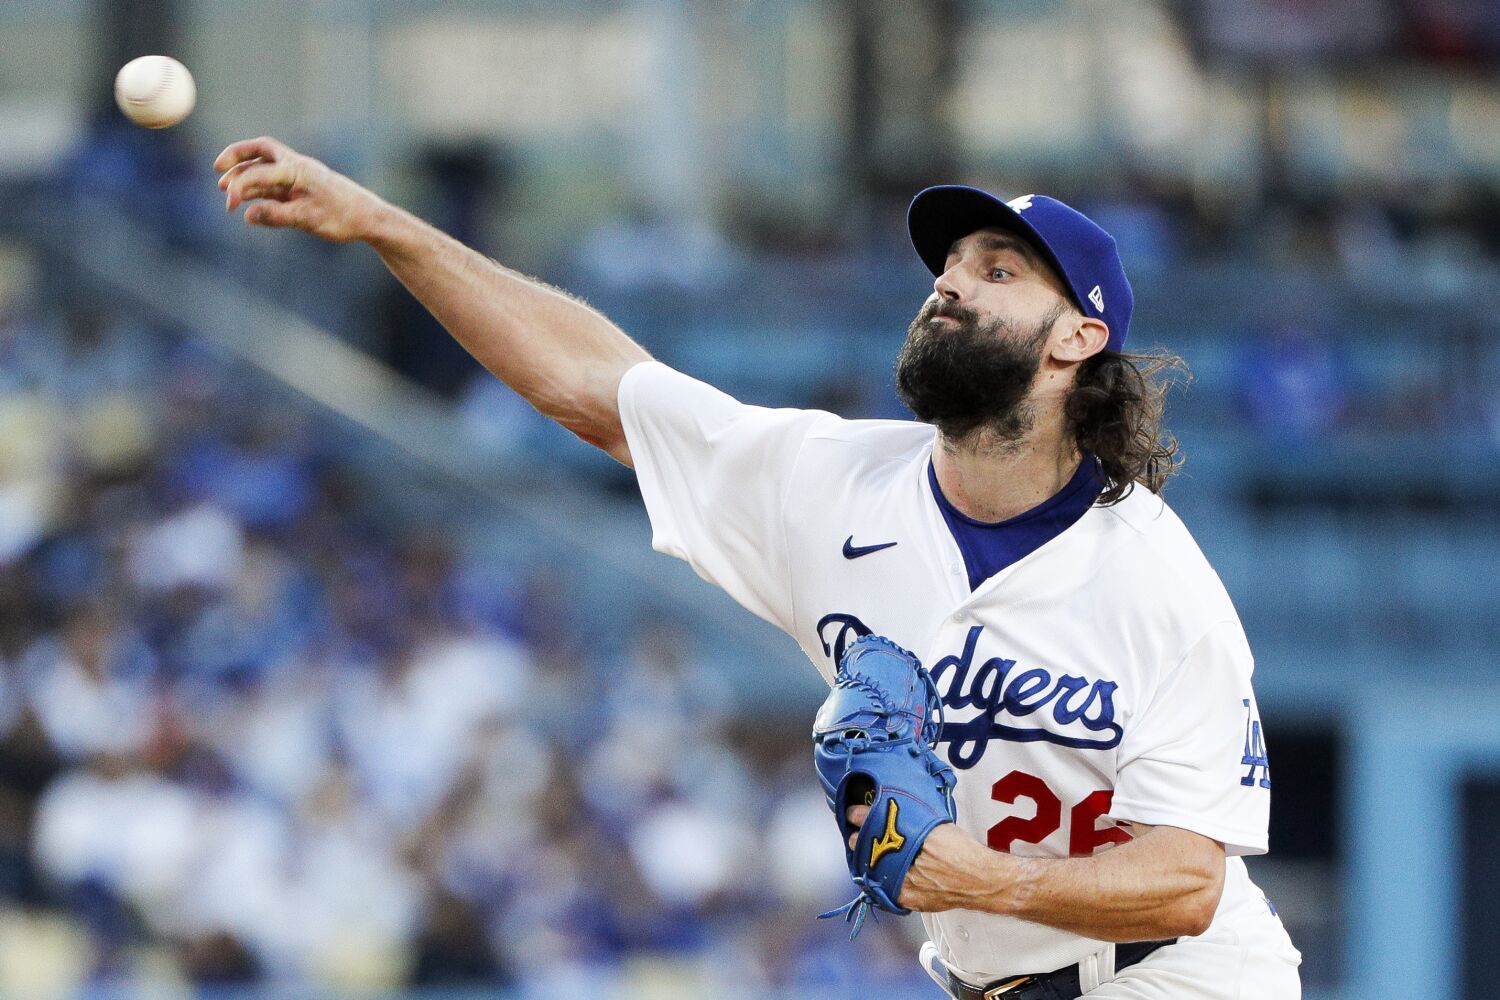 Velocity is down, but results are up for Tony Gonsolin in Dodgers' 5-1 win